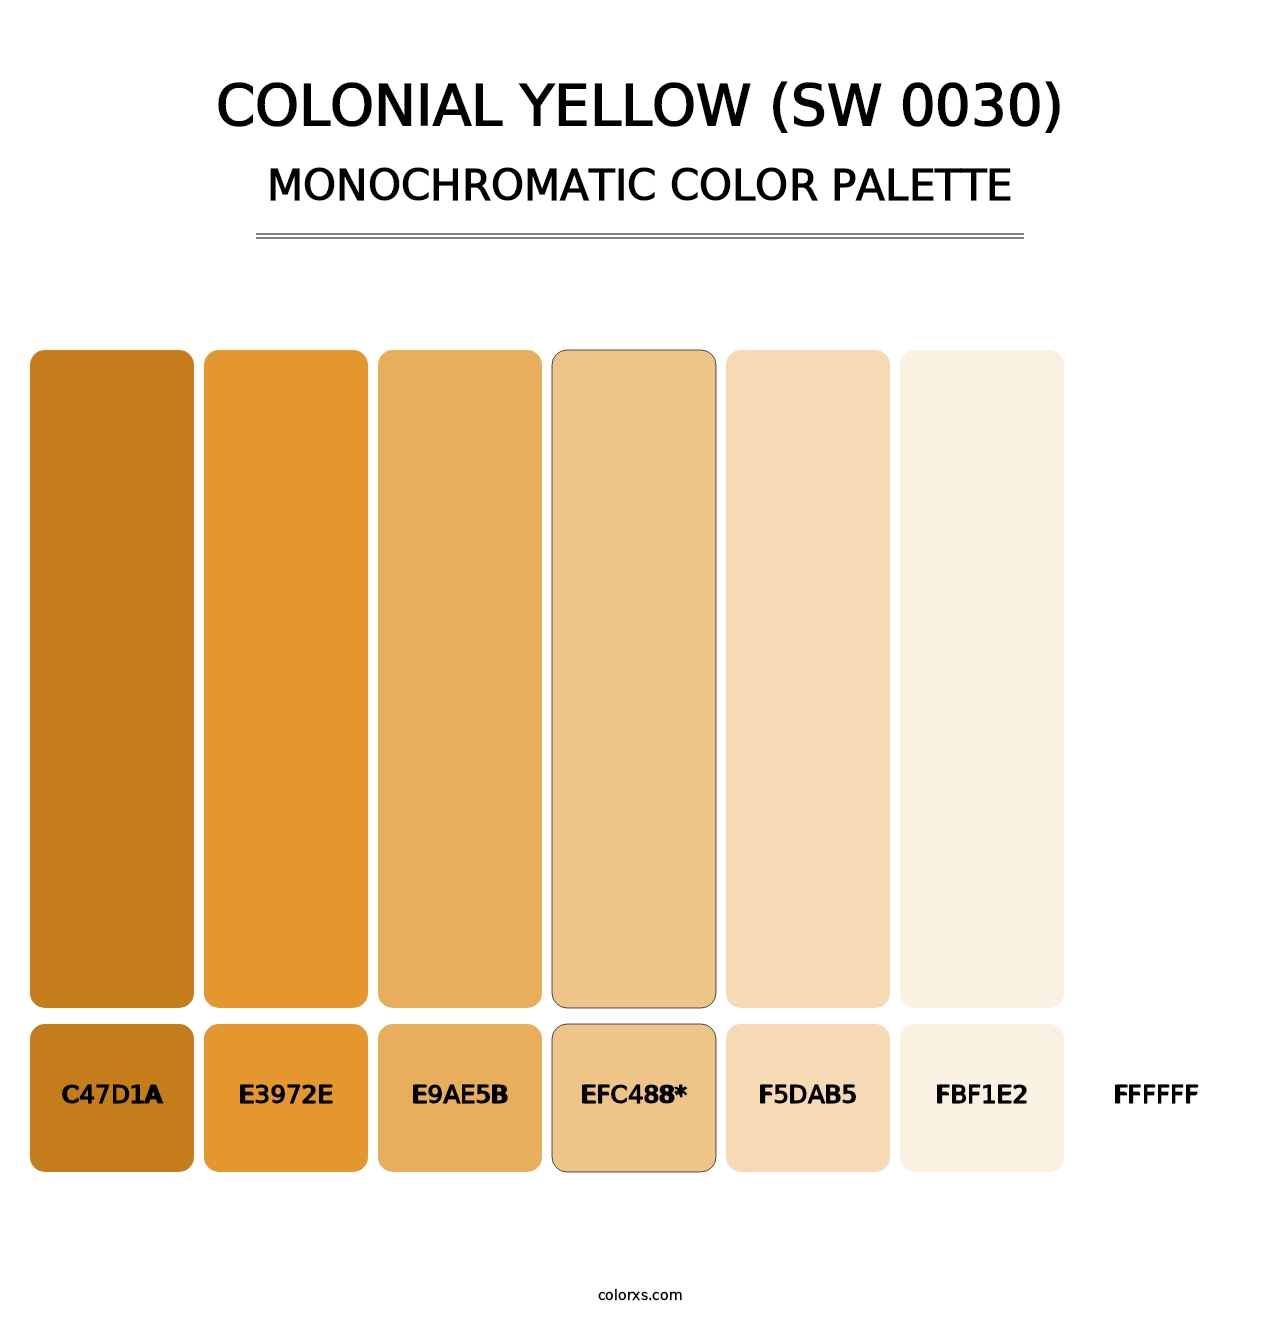 Colonial Yellow (SW 0030) - Monochromatic Color Palette